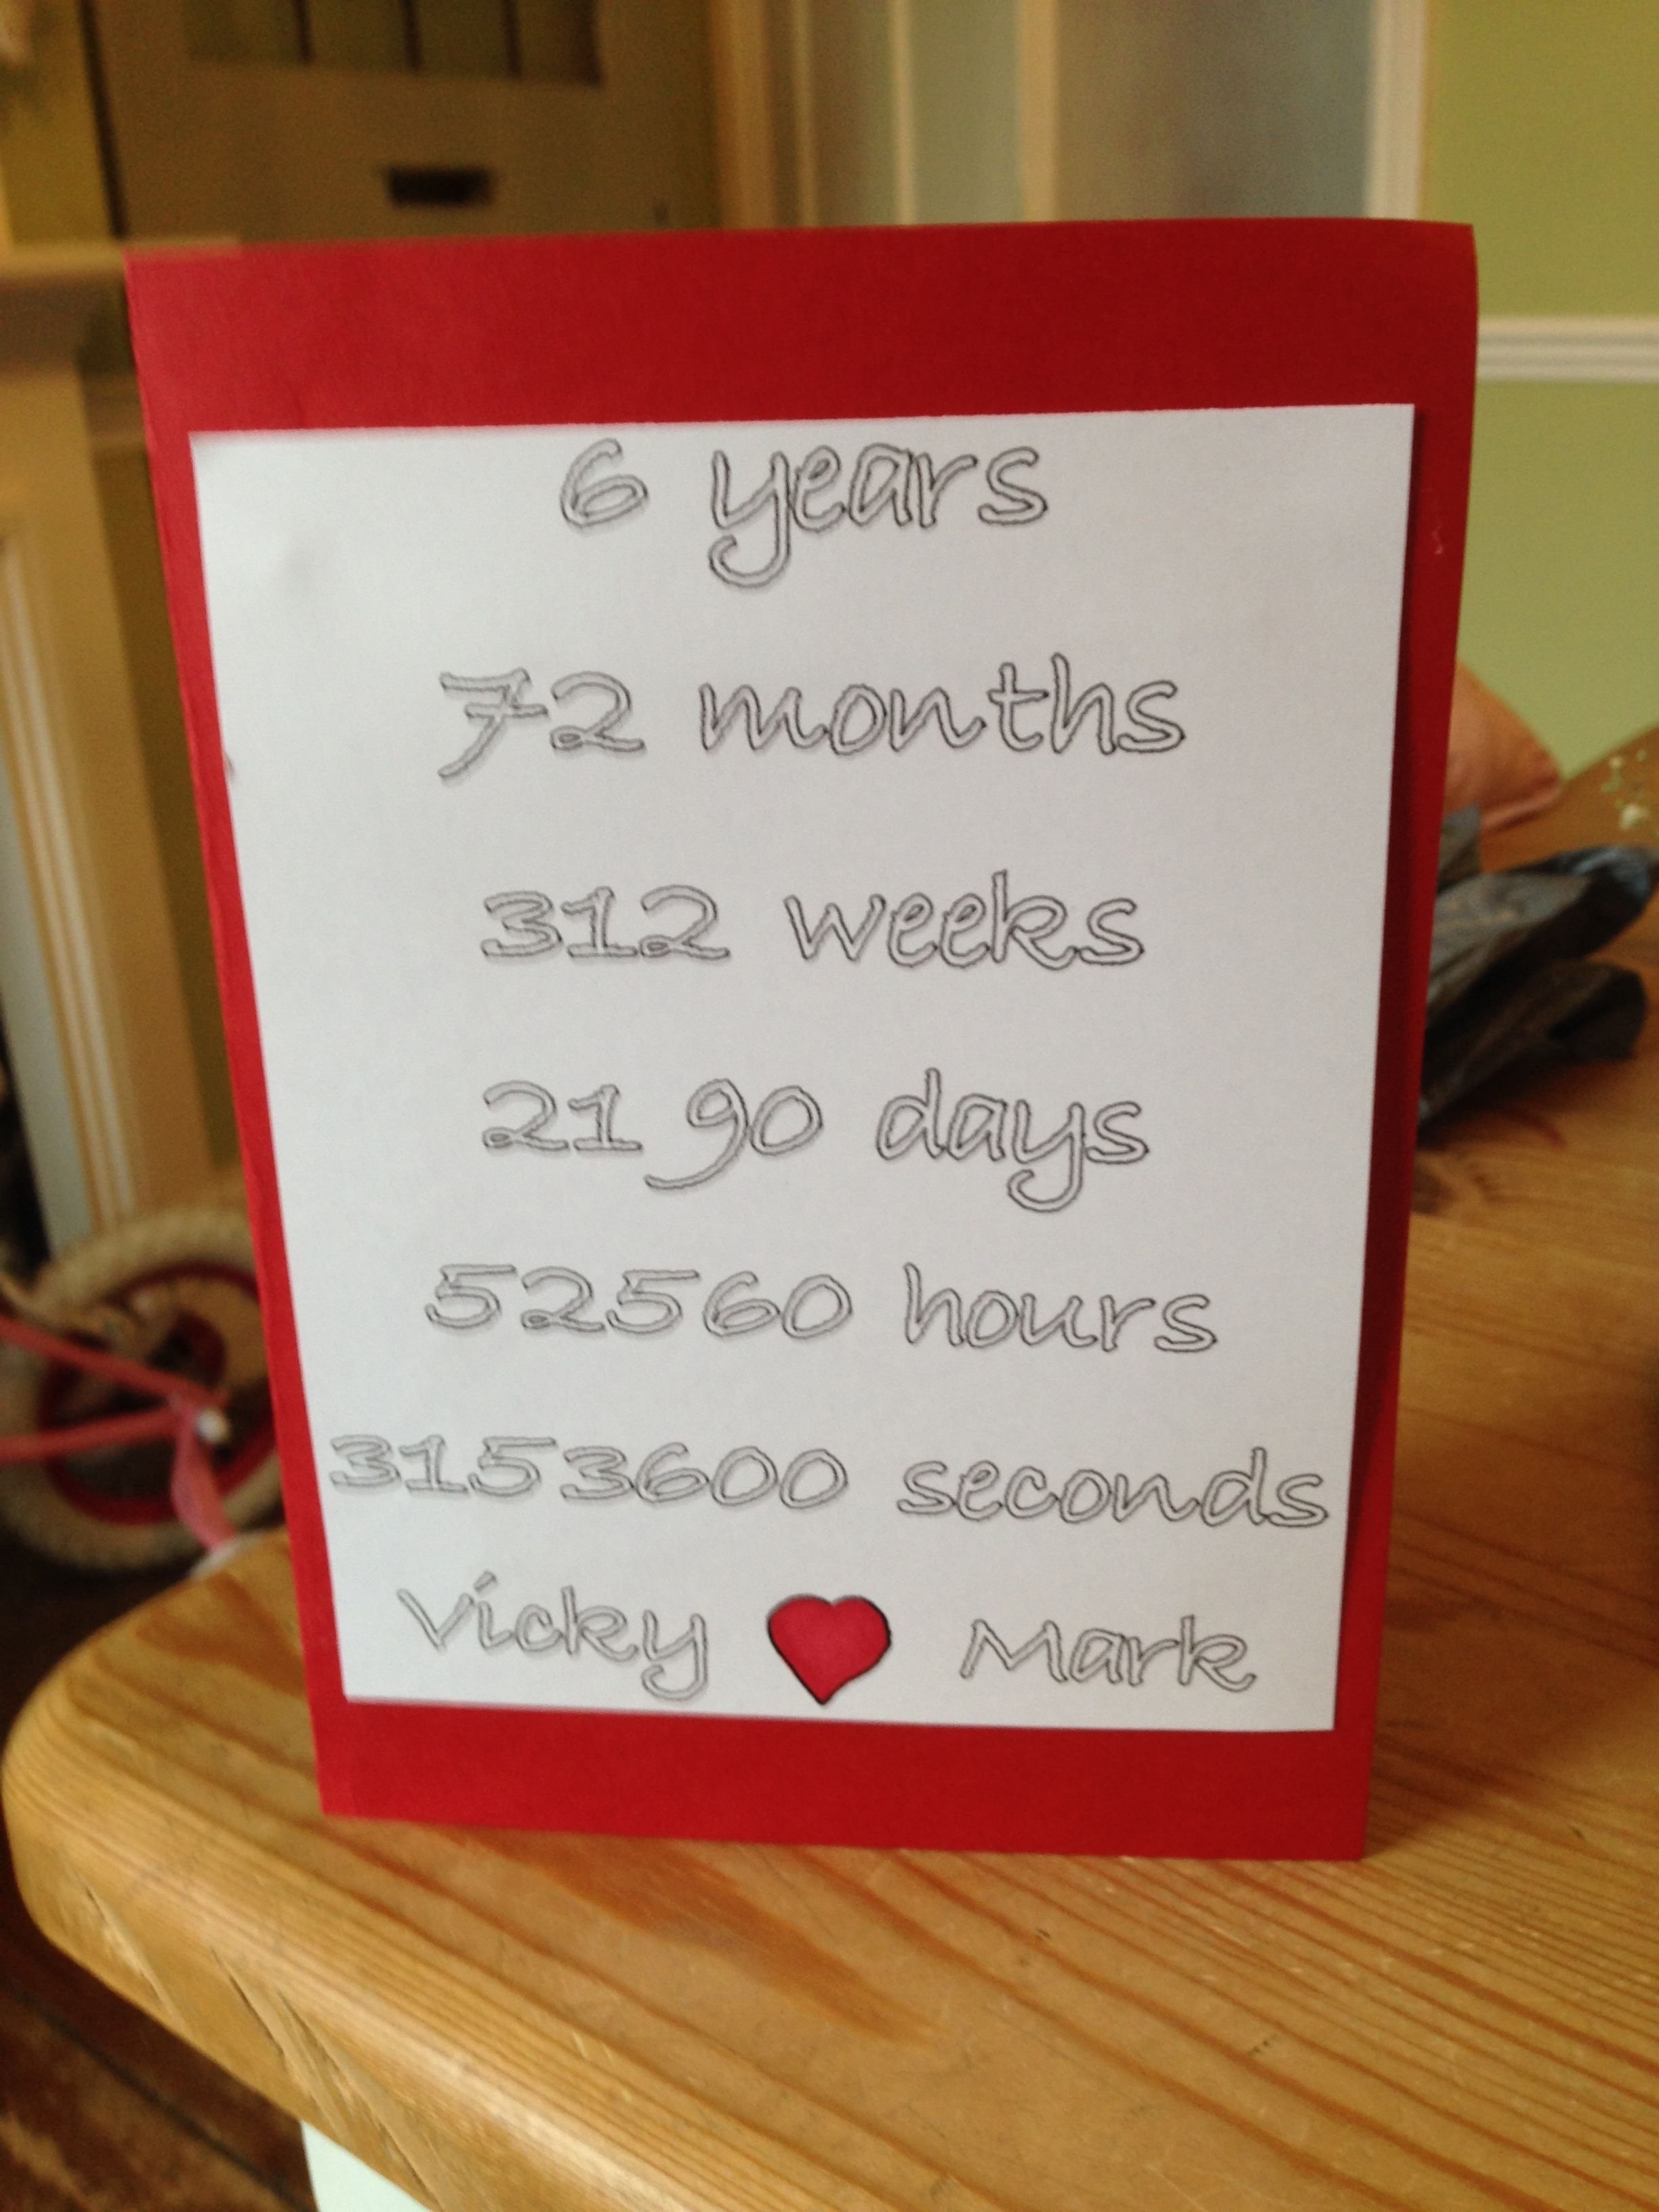 10 Lovely 6 Month Anniversary Date Ideas 6 year anniversary card love it pinterest anniversaries gift 3 2022